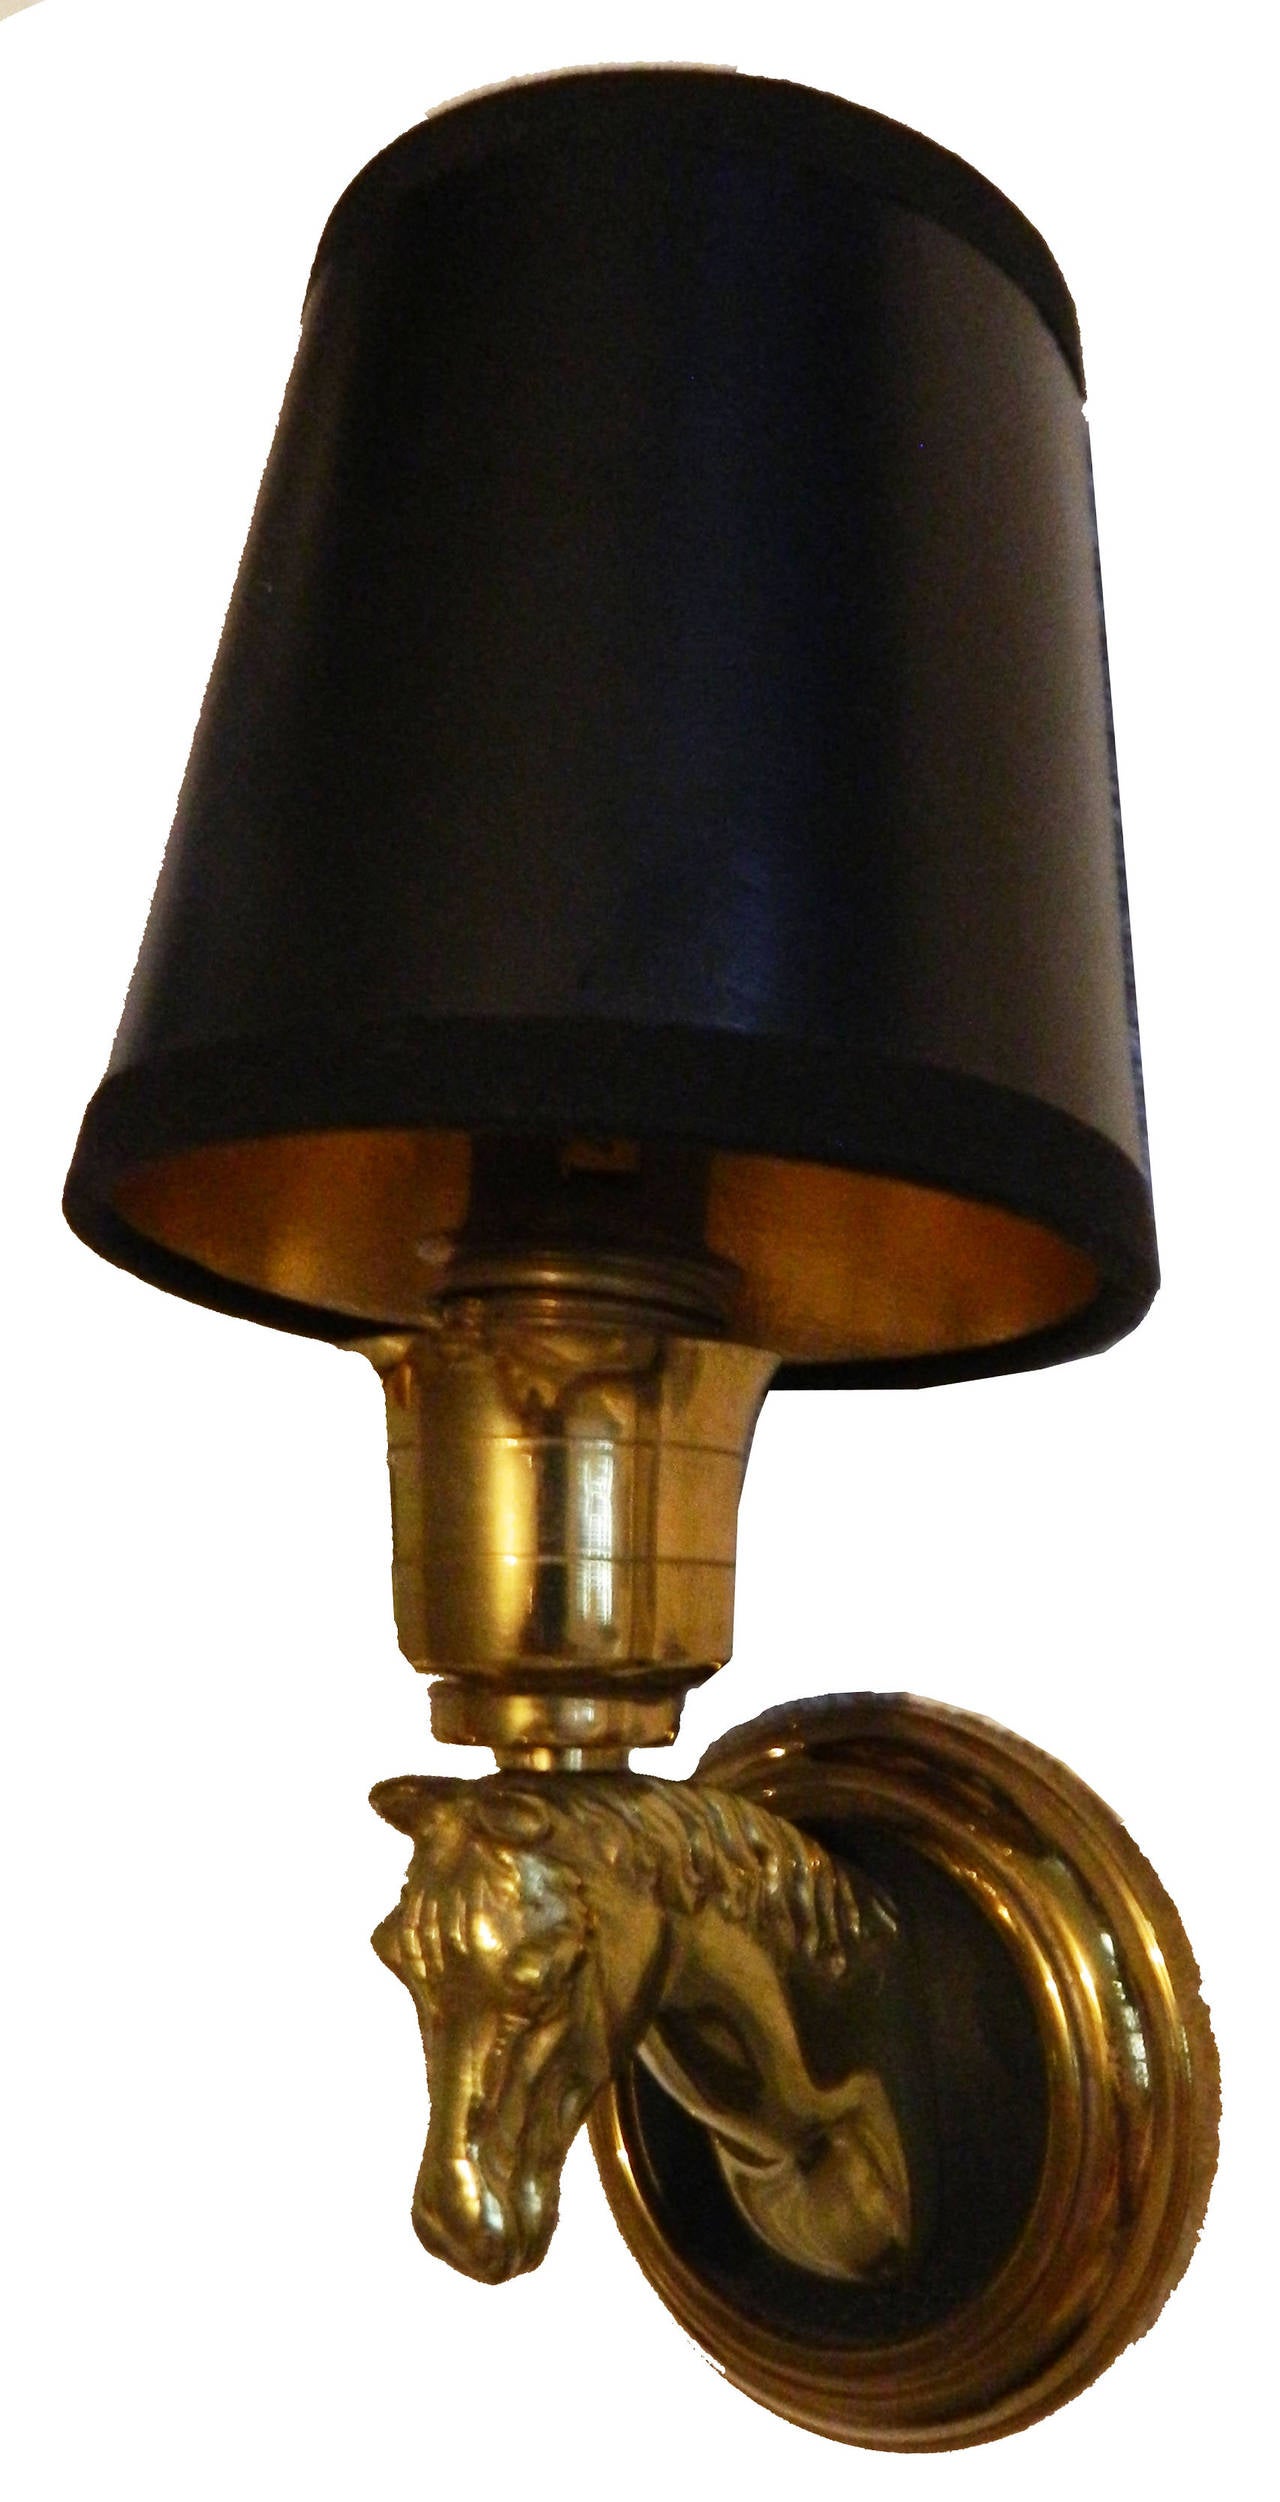 Fantastic set of three pairs of French brass horse sconces, two patina brass and black lacquer brass. Priced by pair.
US rewired and in working condition.
Backplate diameter: 3 1/8 inches.
One bulb, 40 watts max.
Priced by pair.
Have a look on